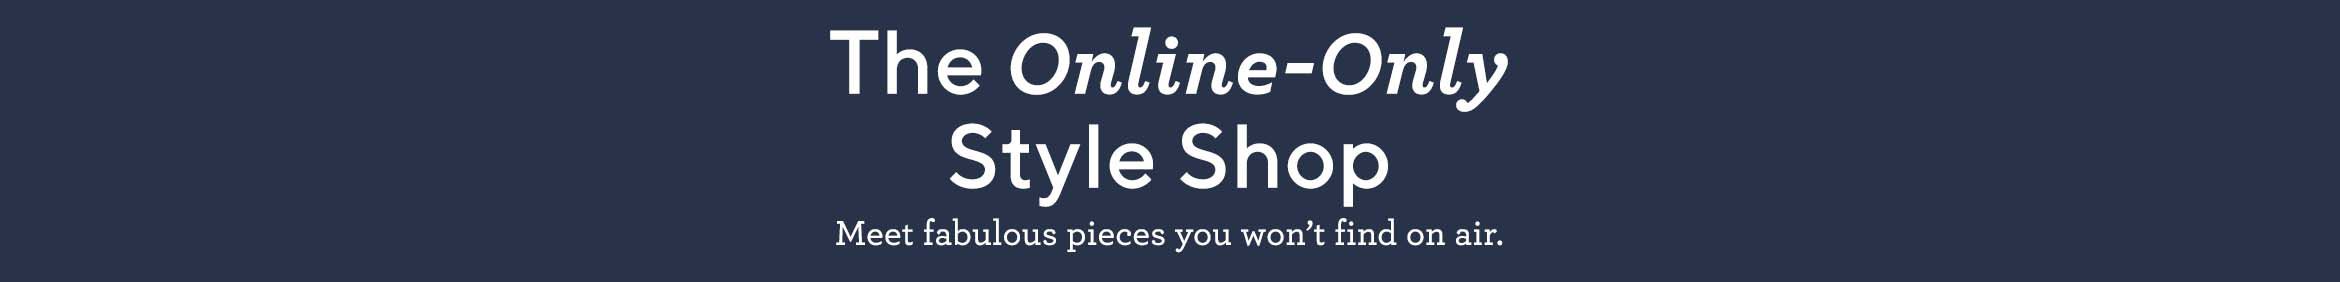 The Online-Only Style Shop - Meet fabulous pieces you won't find on air